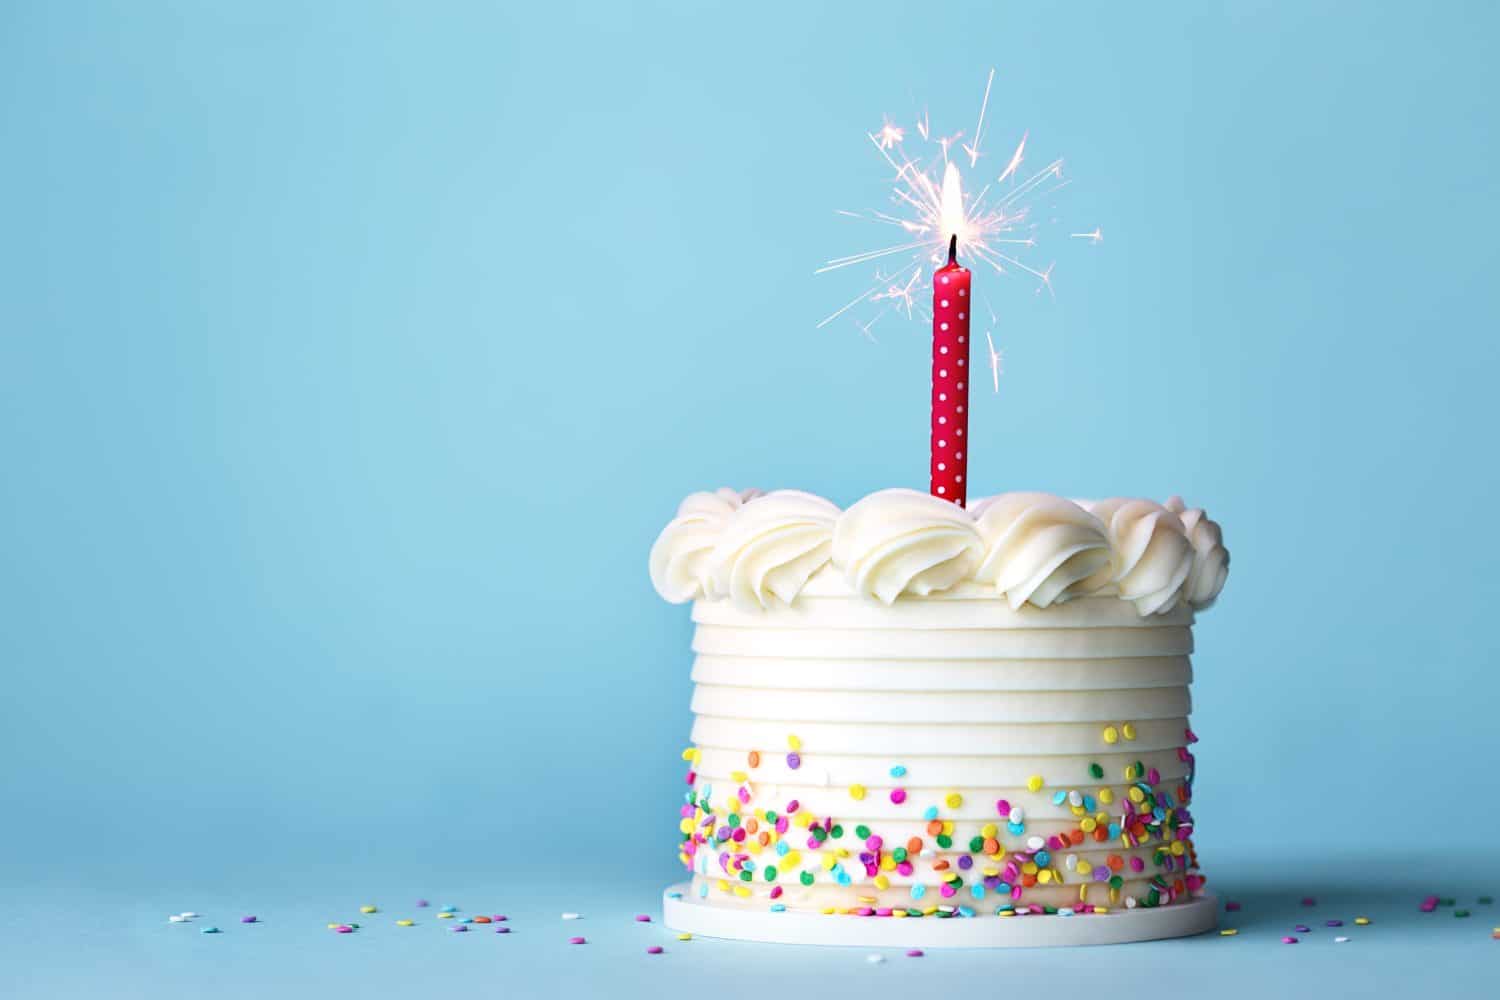 Birthday cake with colorful sprinkles and one red birthday candle against a plain blue background